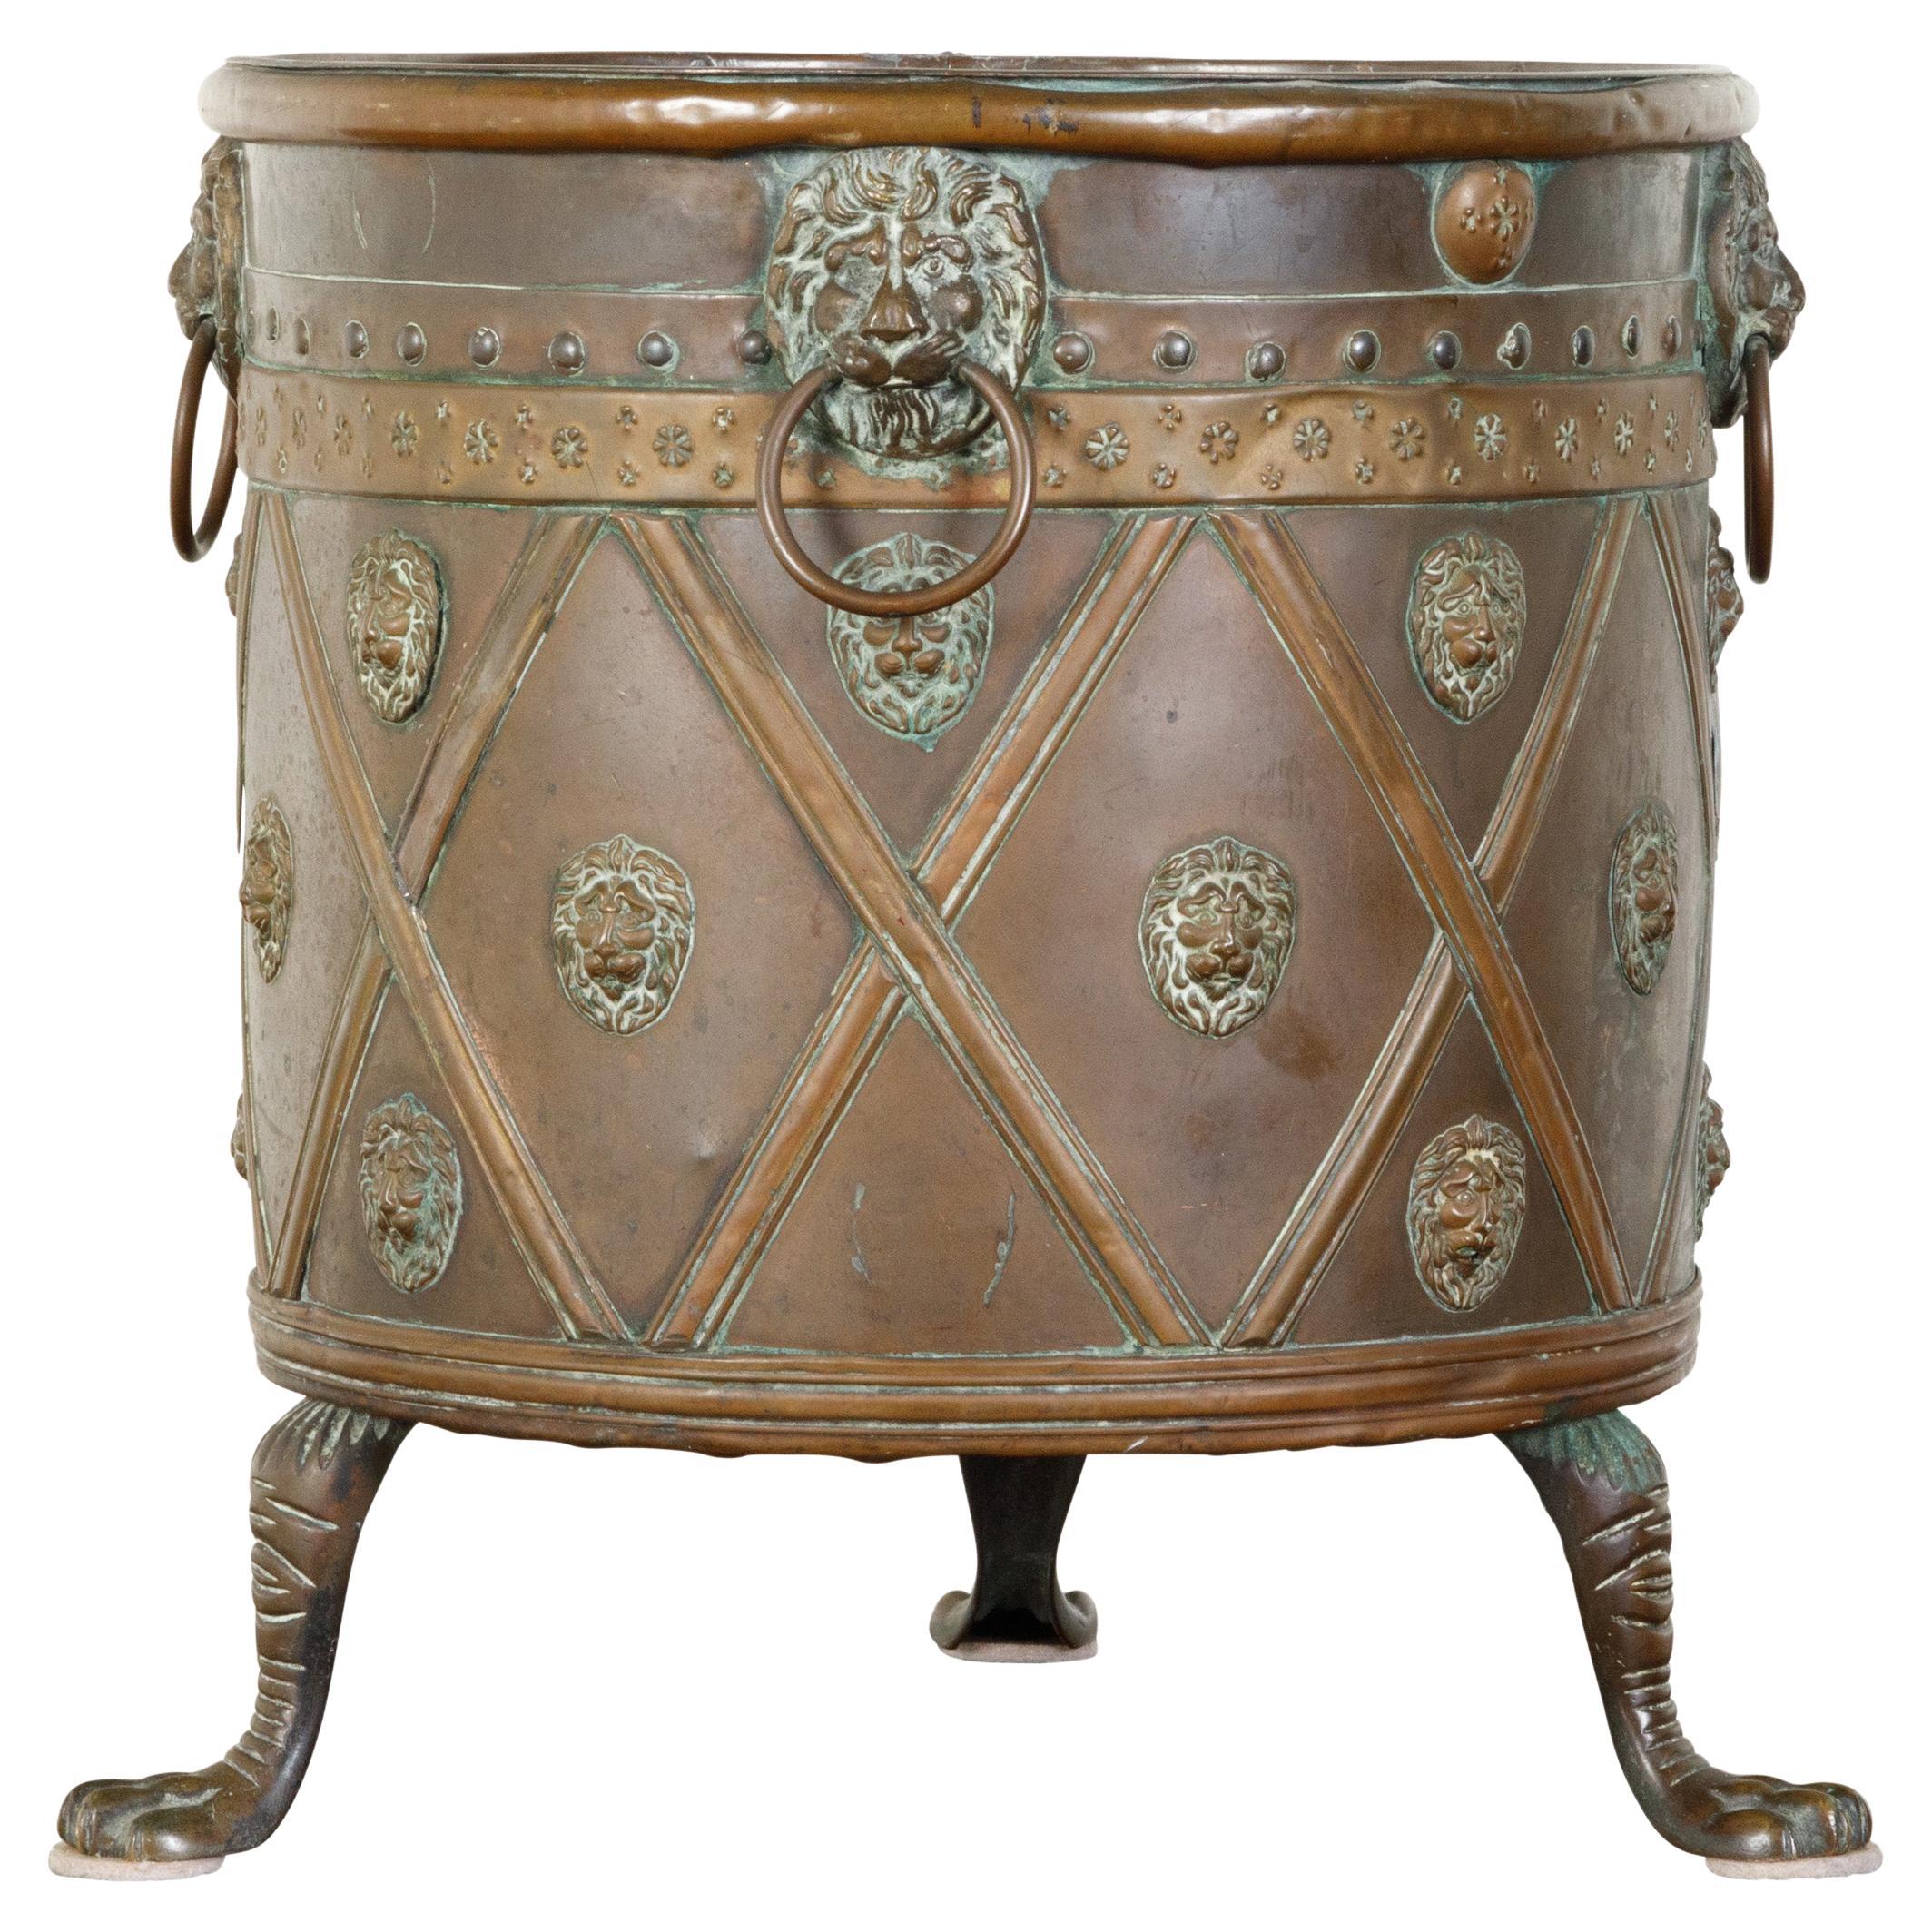 English 19th Century Copper Planter with Lion Heads and Diamond Motifs